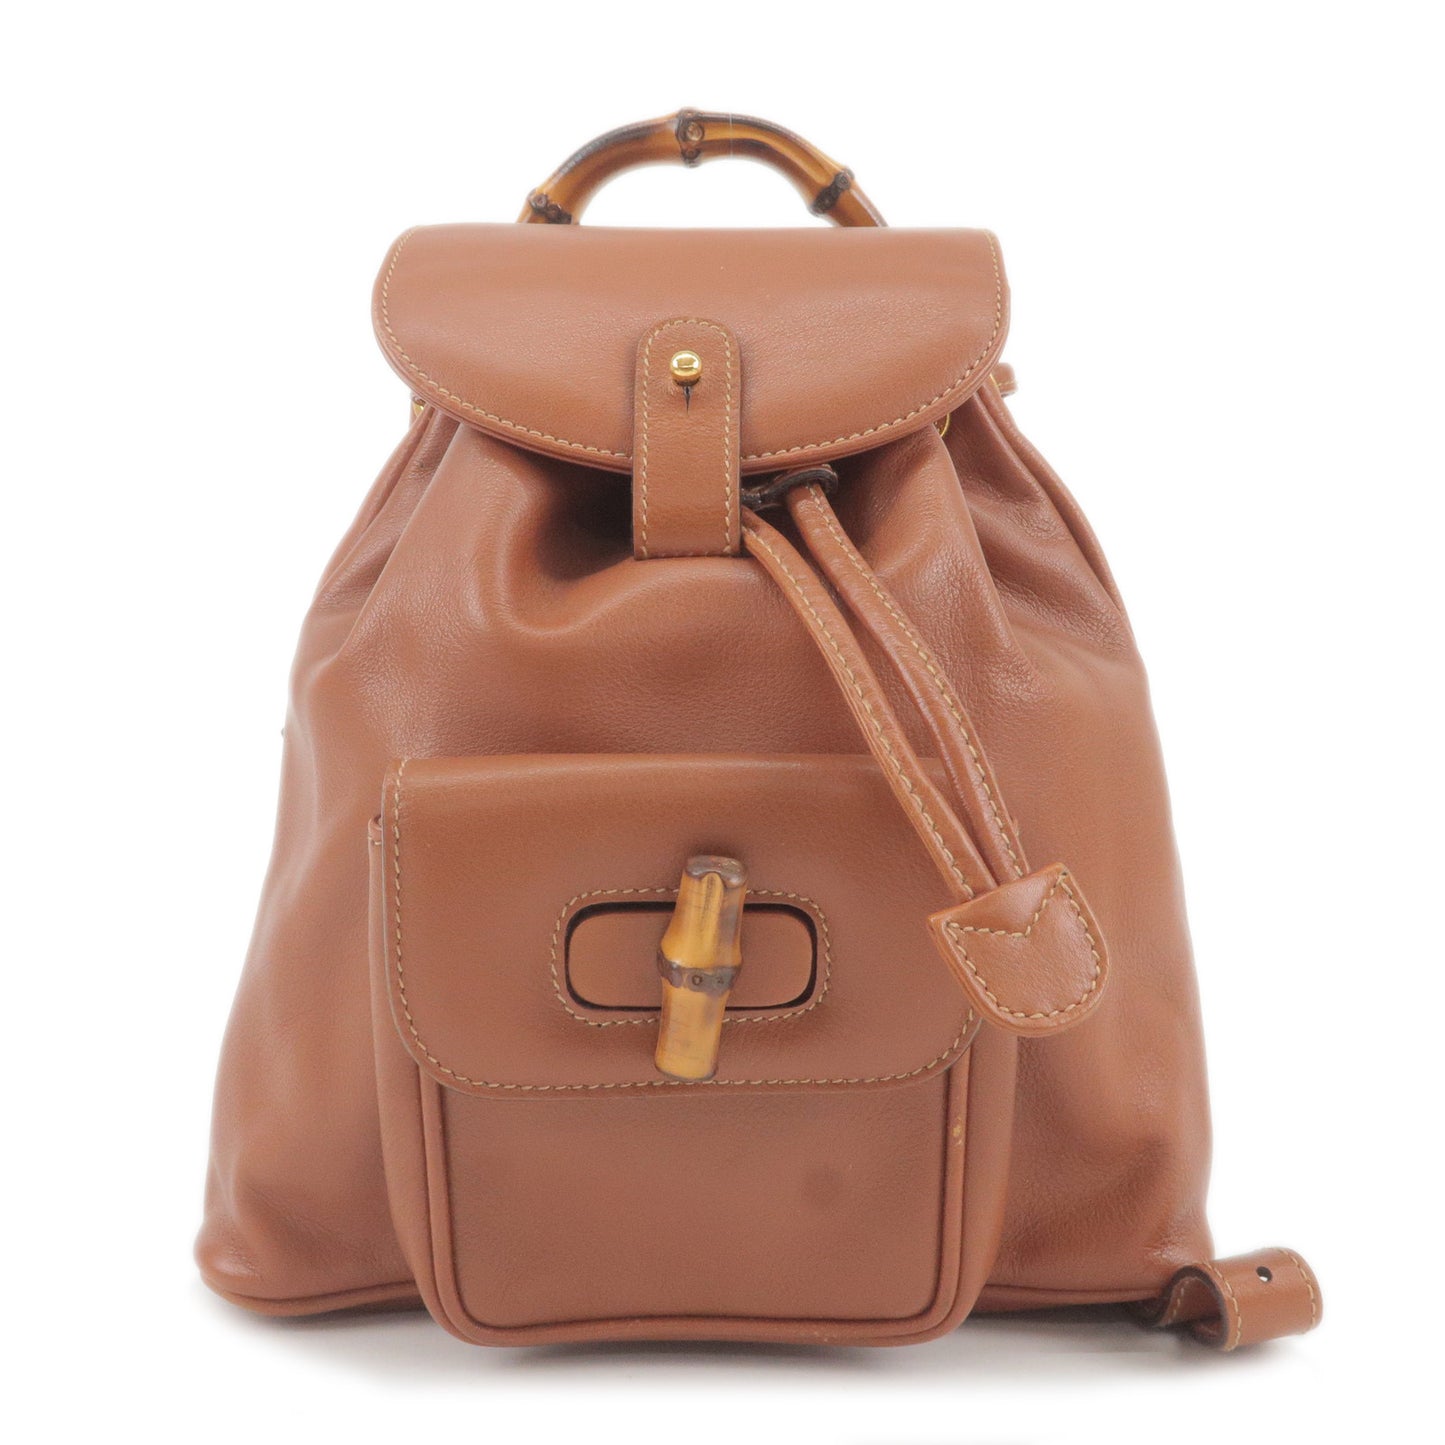 GUCCI-Bamboo-Leather-Back-Pack-Ruck-Sack-Bag-Brown-003.1705